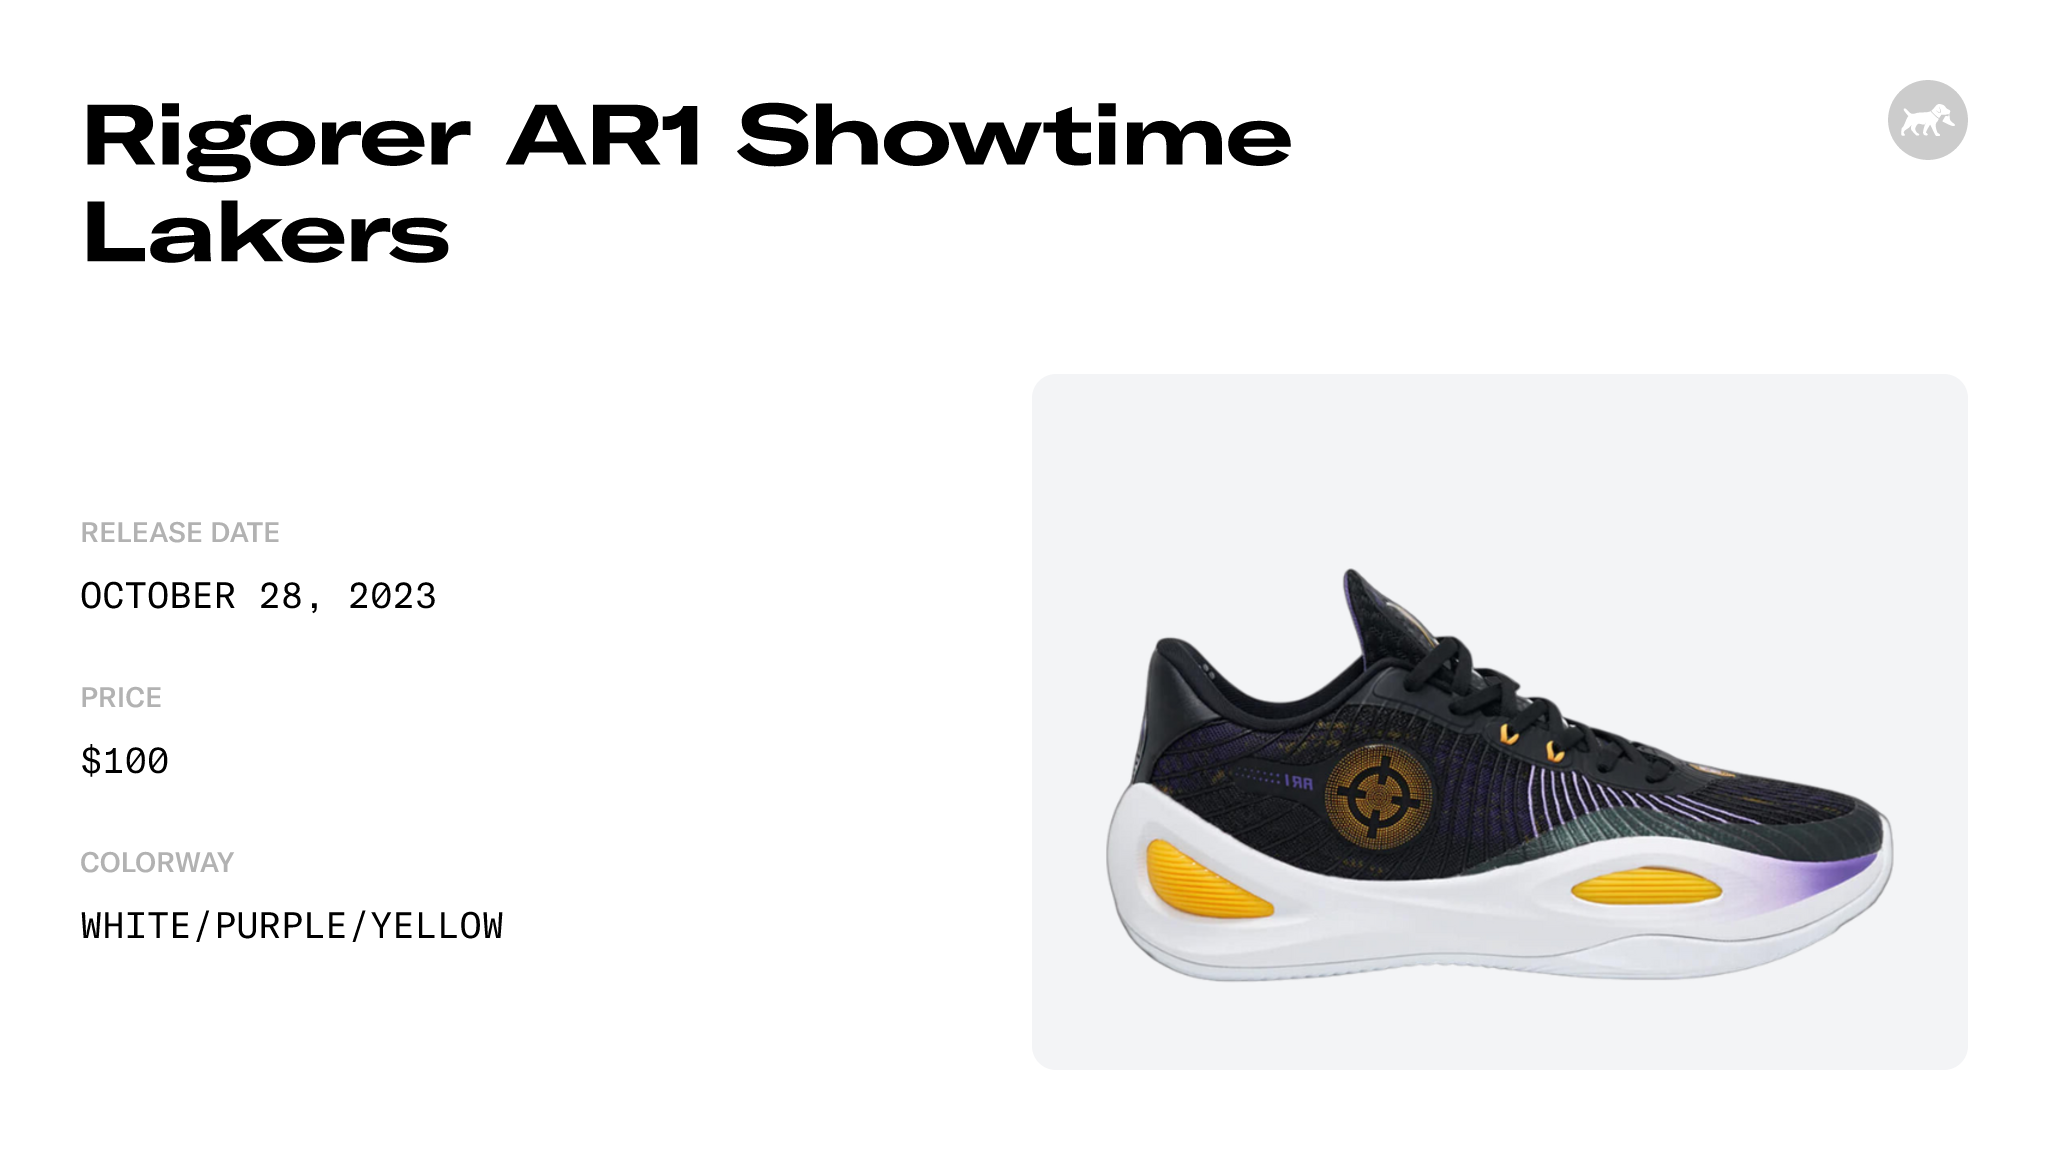 AR1 Rigorer Date Release Raffles Lakers and Z323360104-033 Showtime -